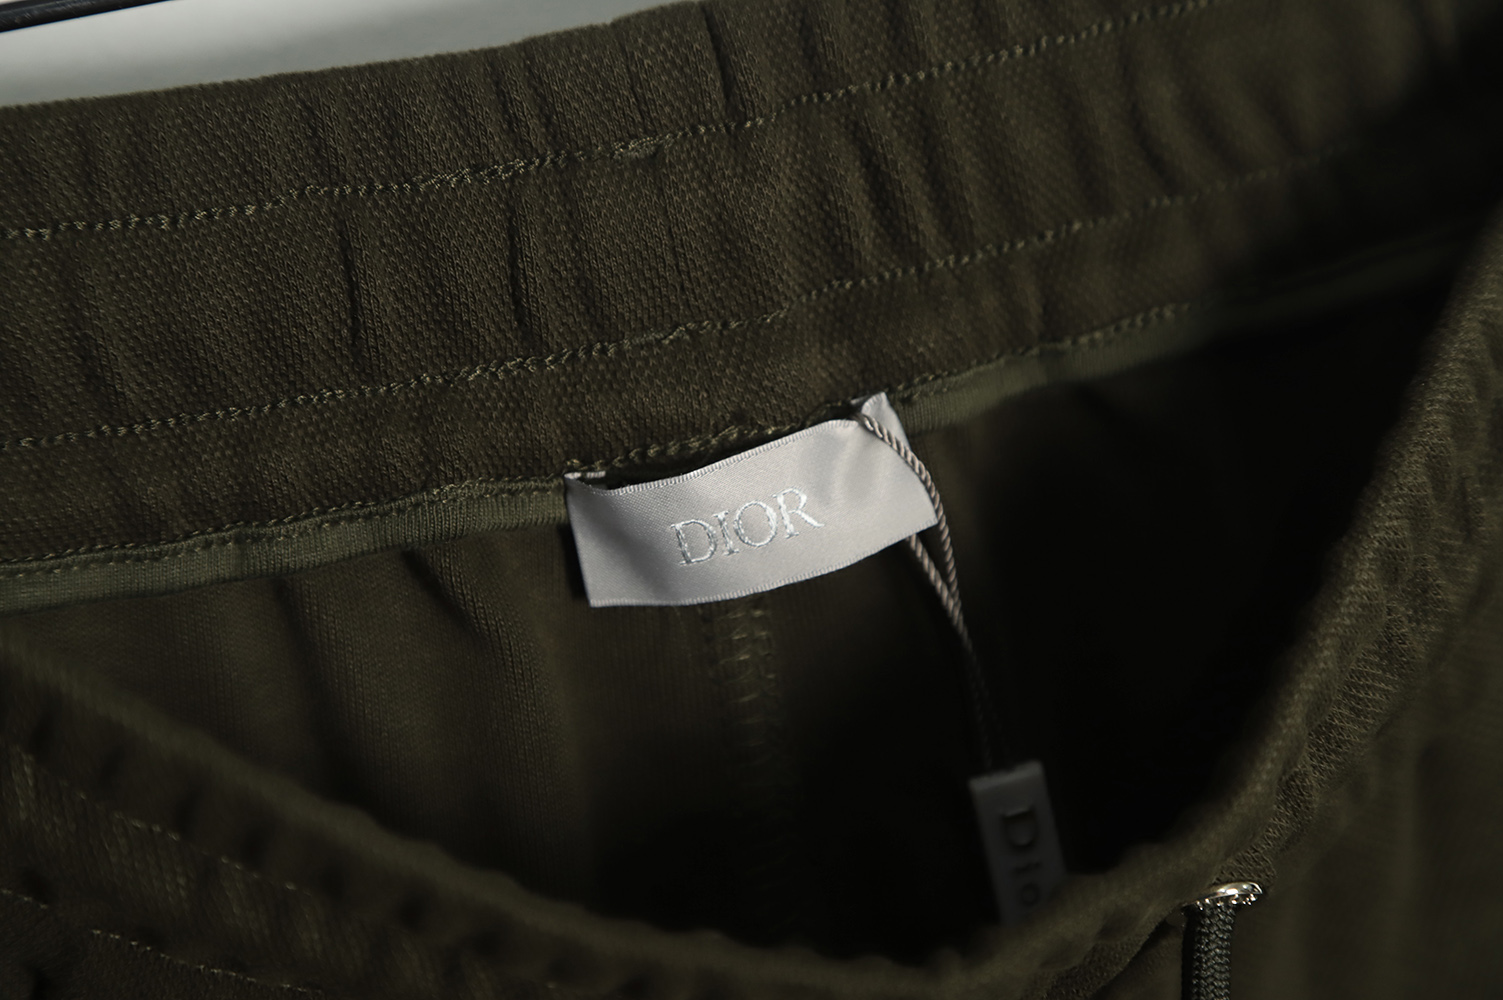 Dior 2022 early autumn new 1947 logo pants